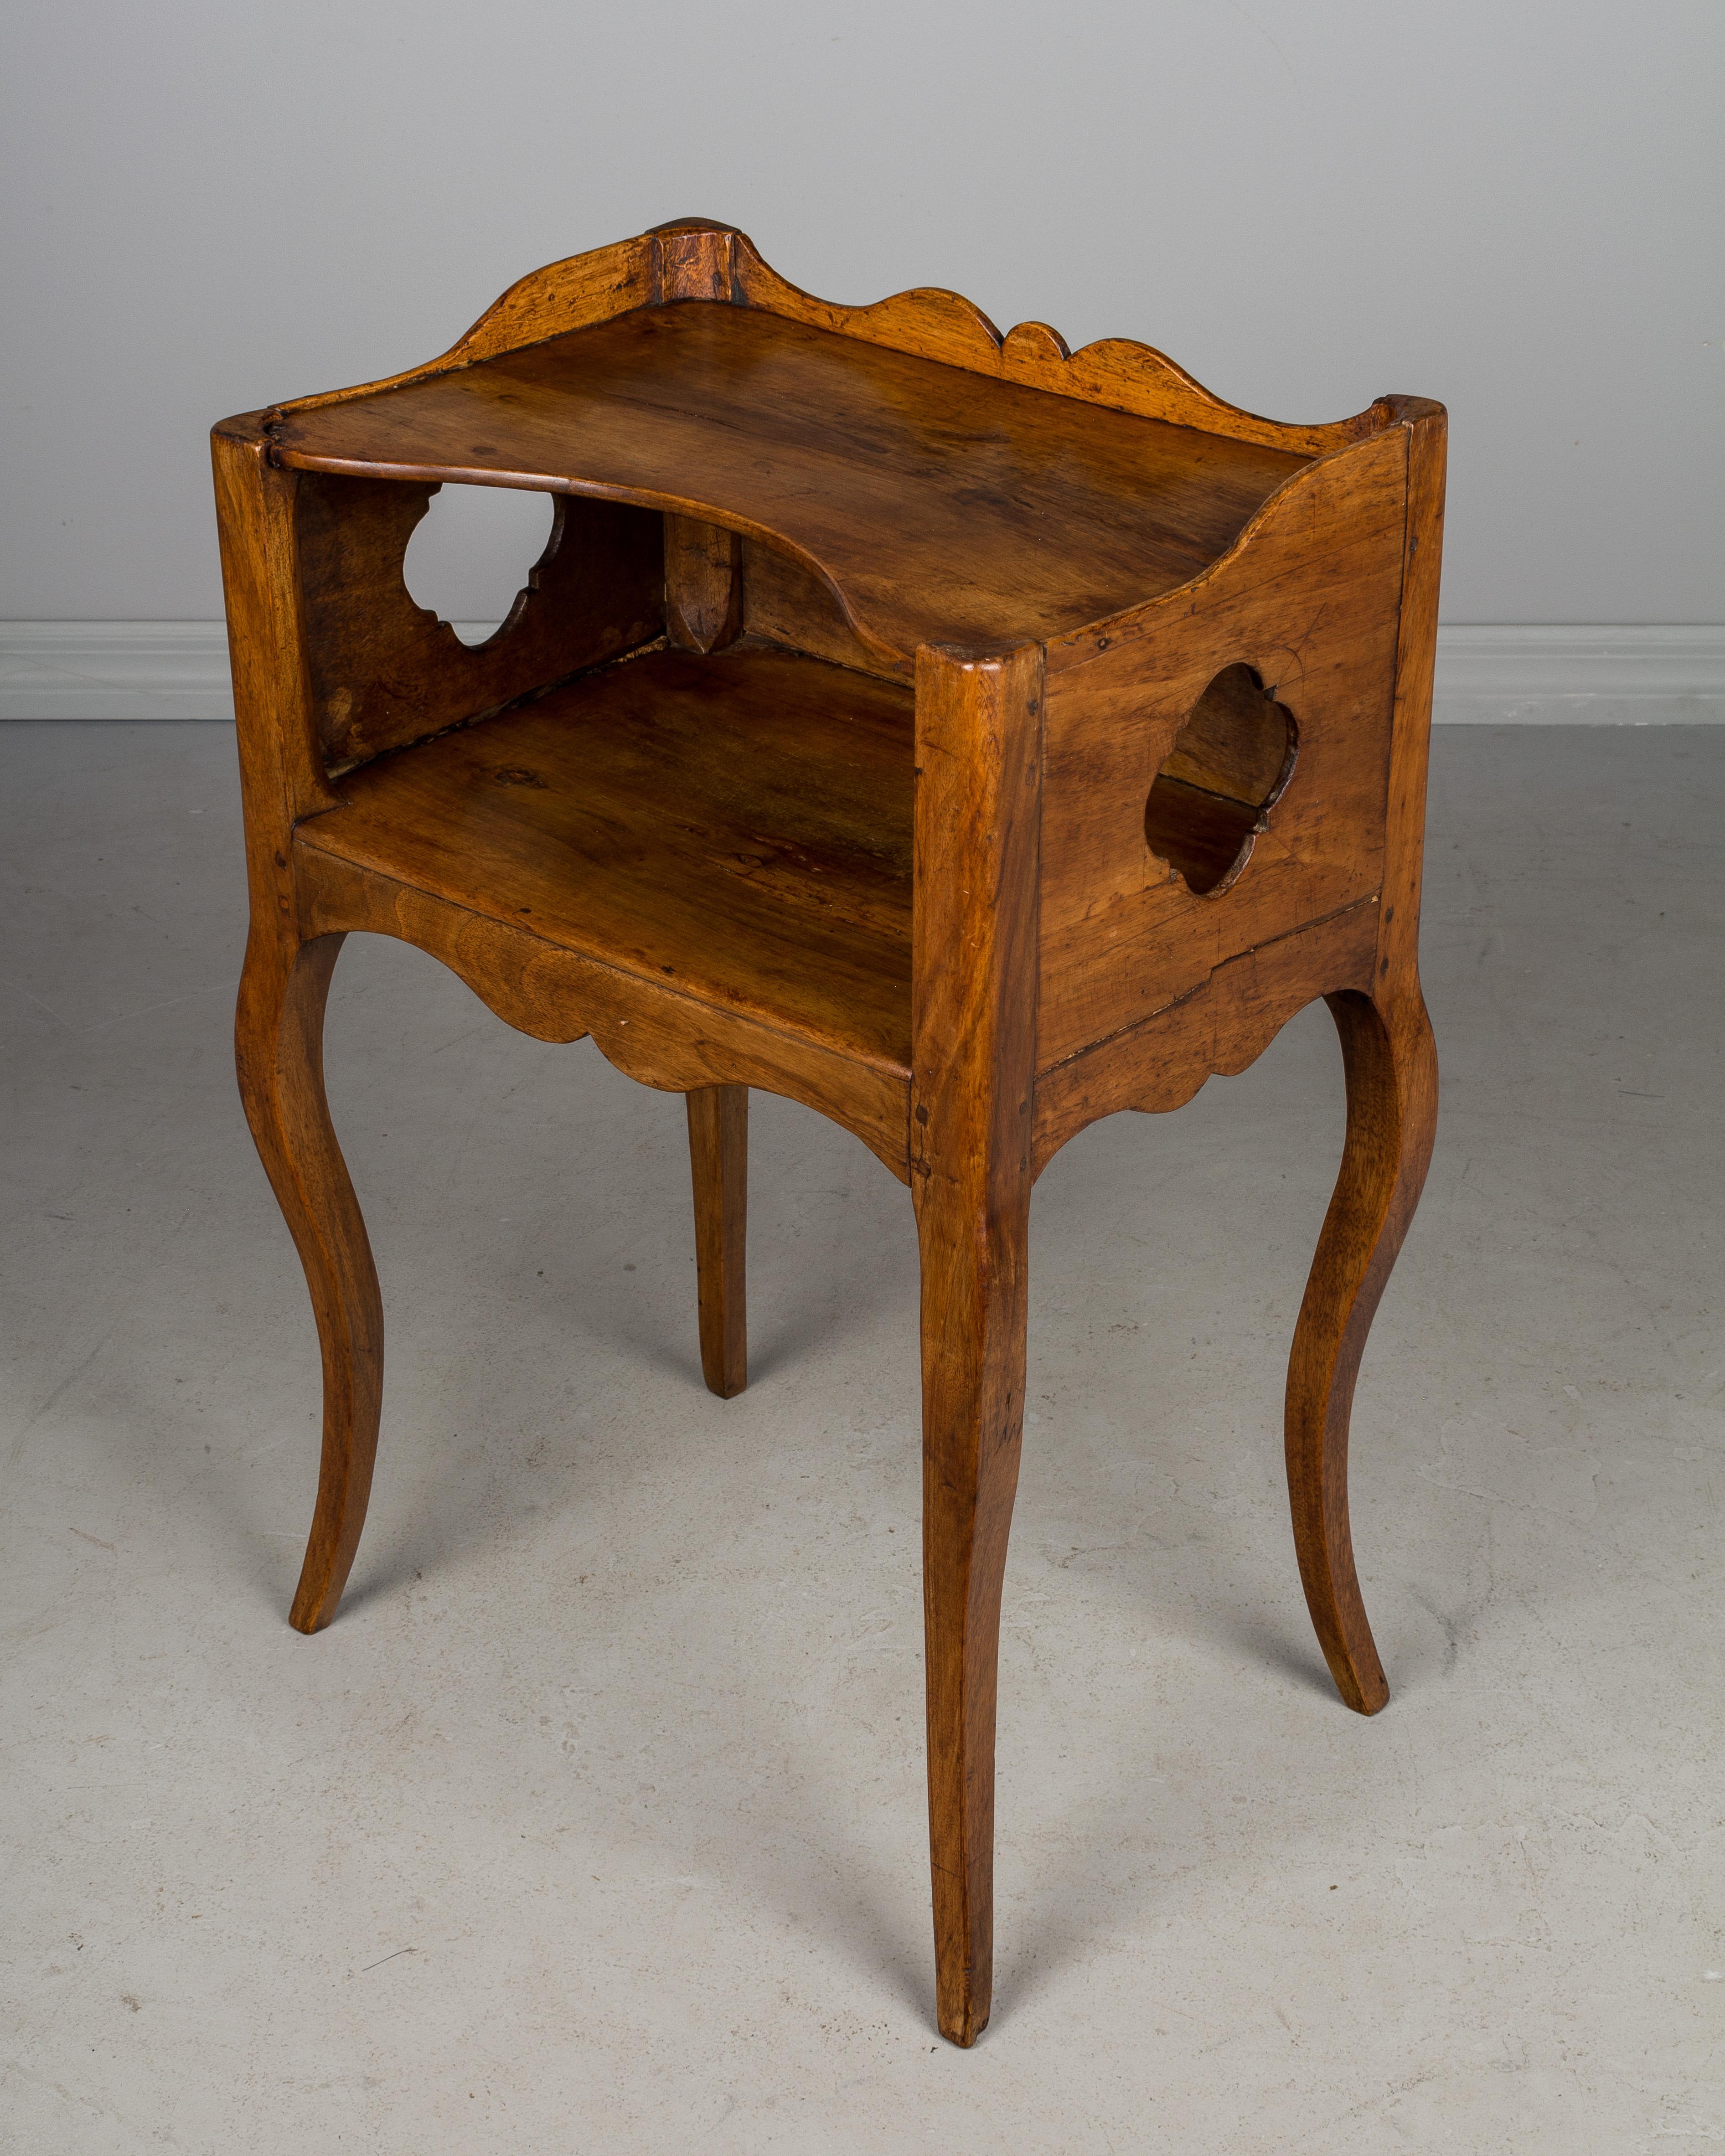 Hand-Crafted 18th Century Louis XV Side Table